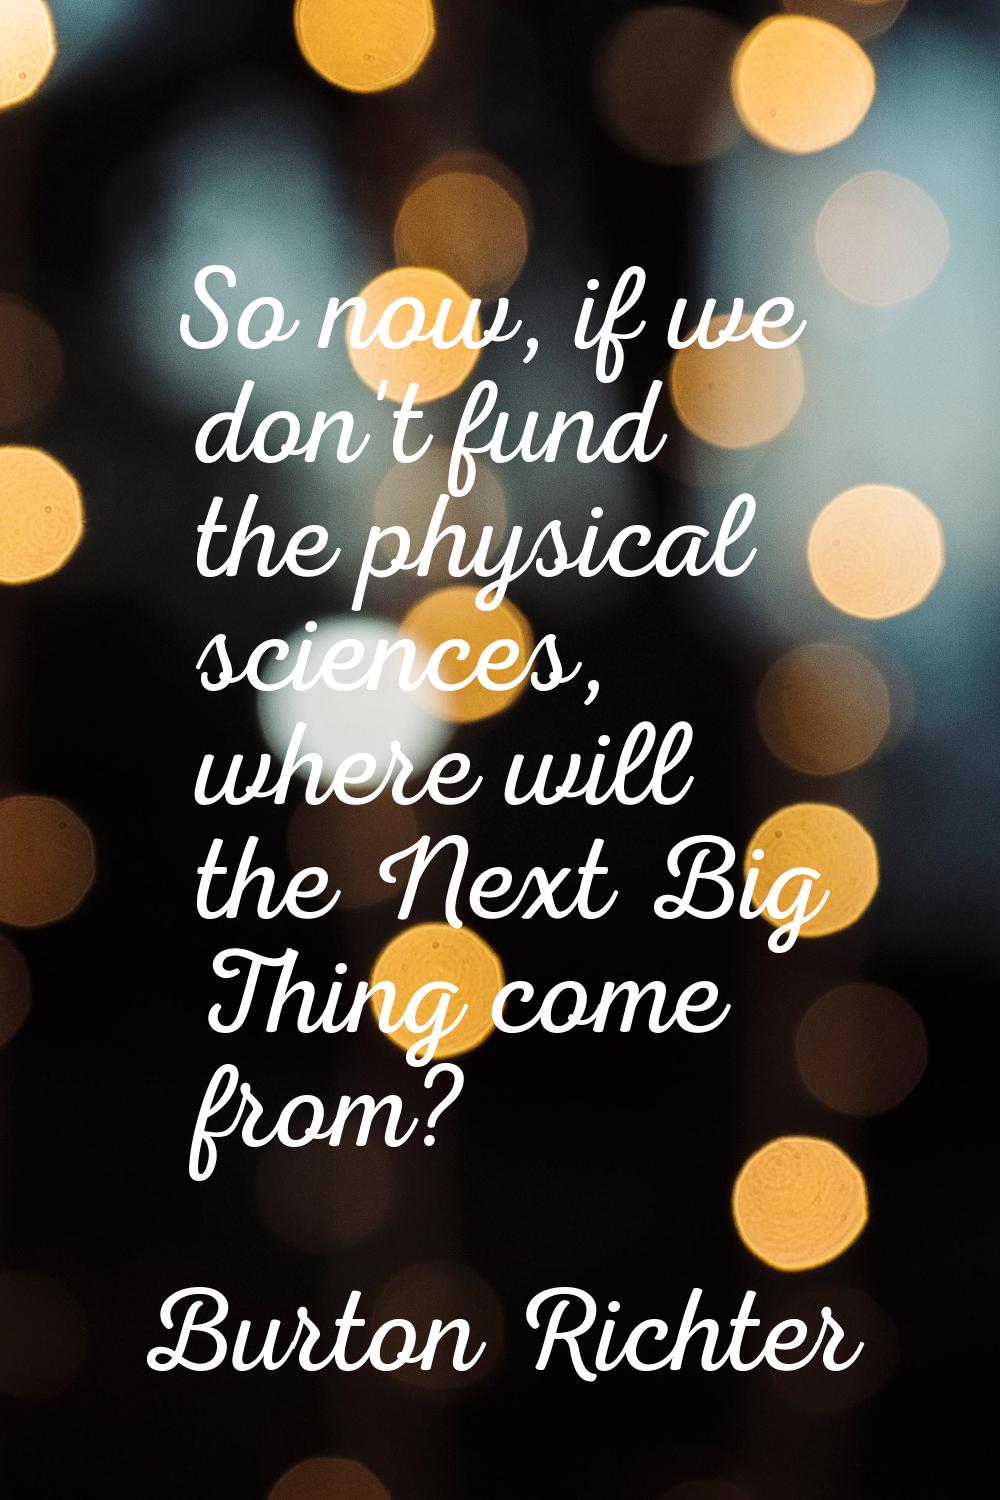 So now, if we don't fund the physical sciences, where will the Next Big Thing come from?